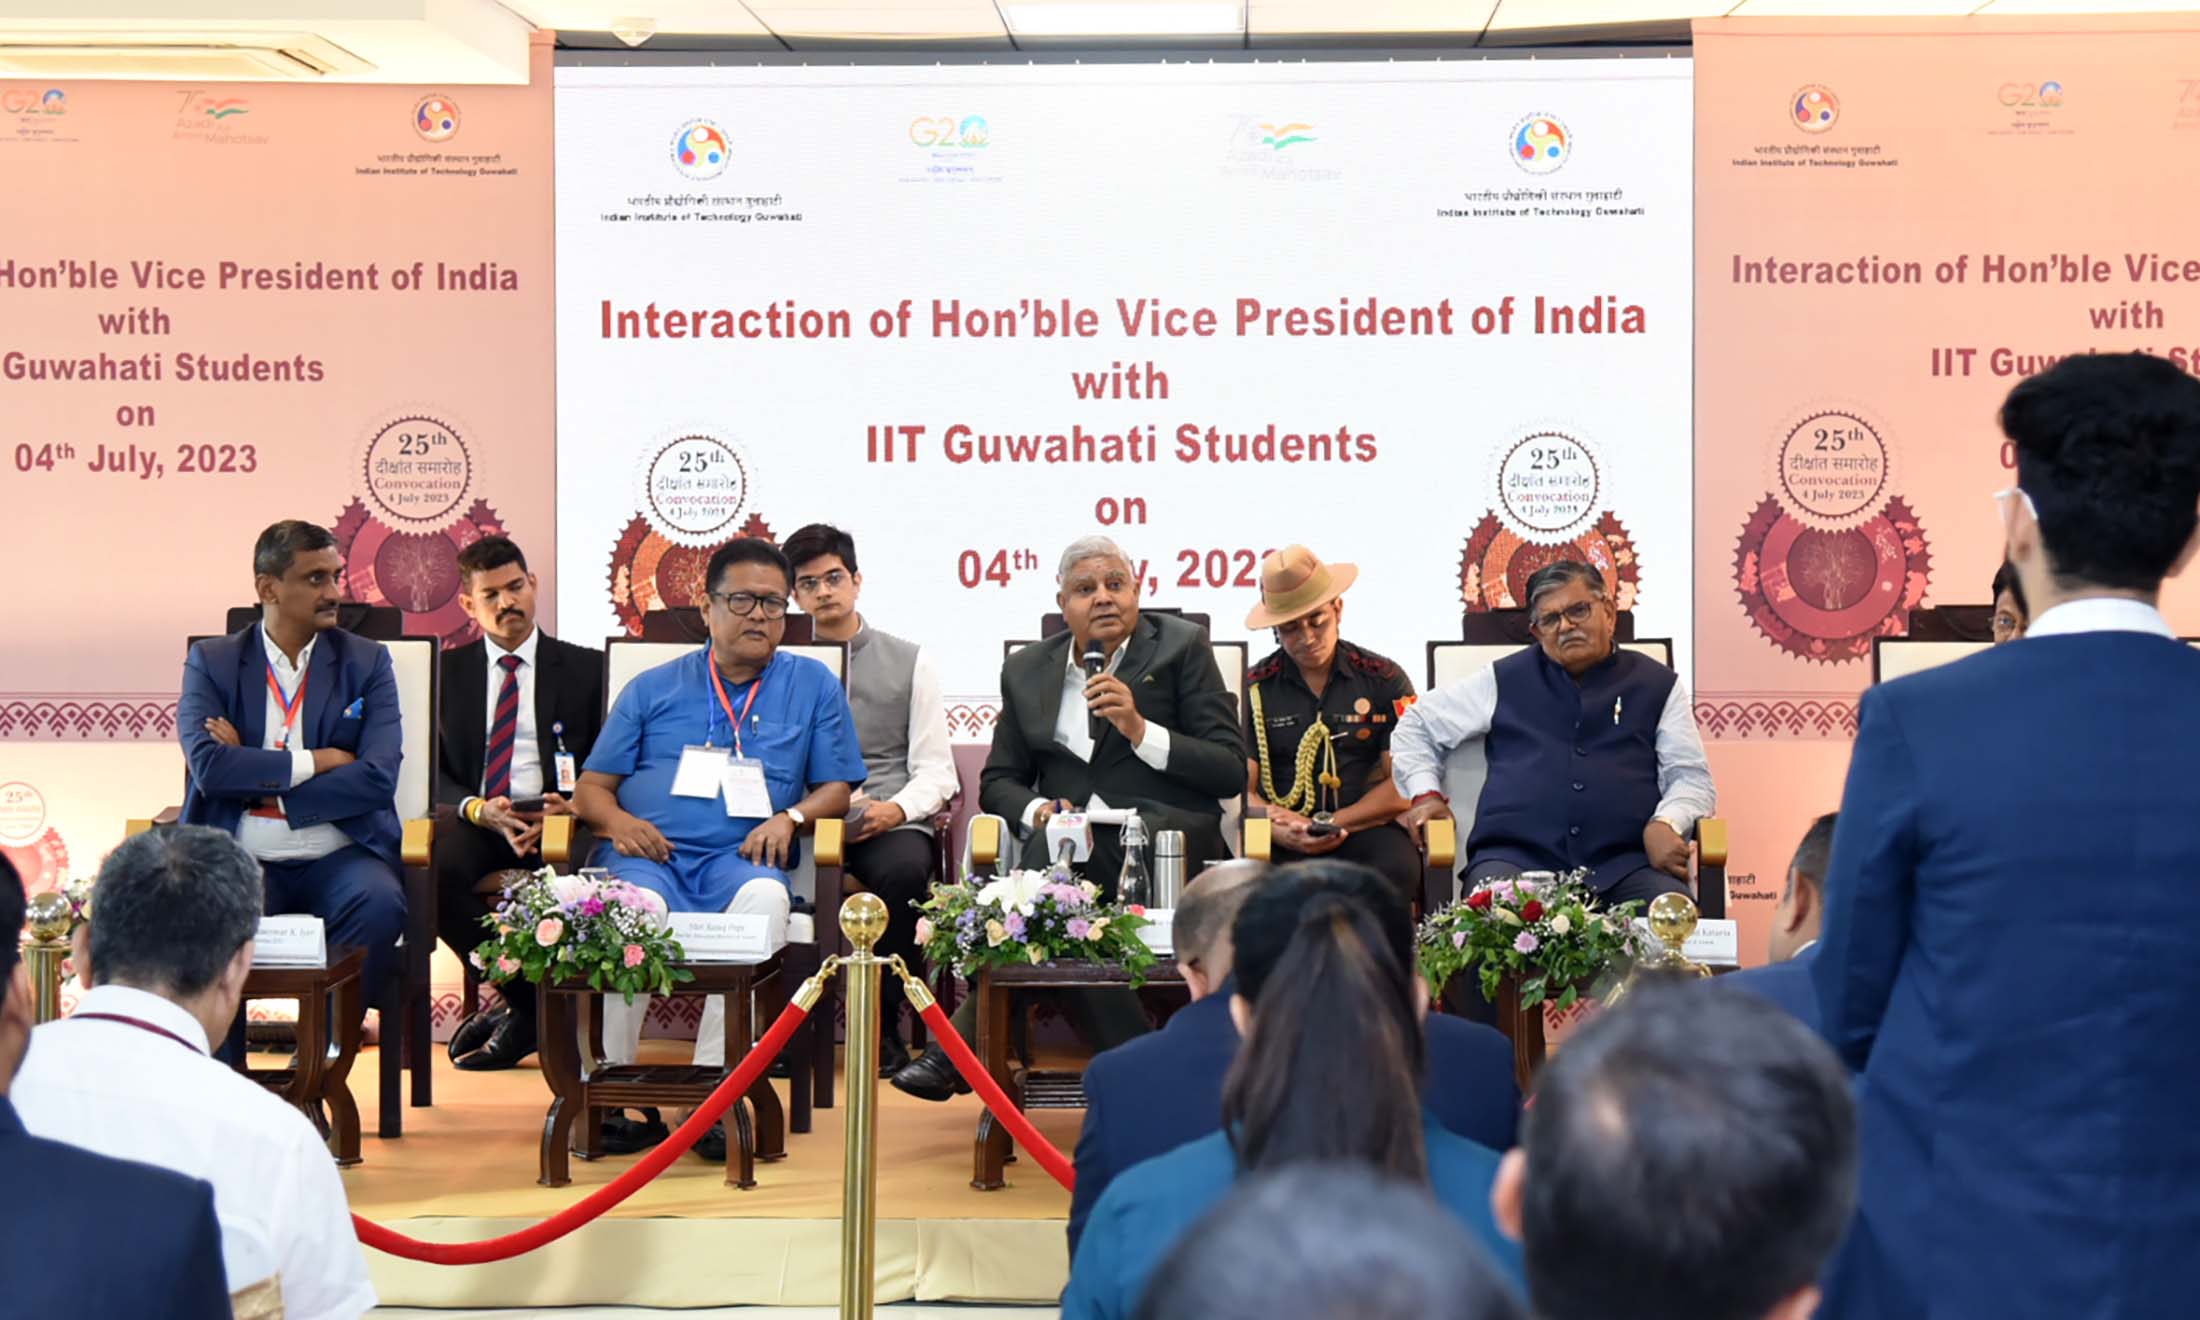 The Vice President, Shri Jagdeep Dhankhar interacting with IIT Guwahati Students in Assam on July 4, 2023.